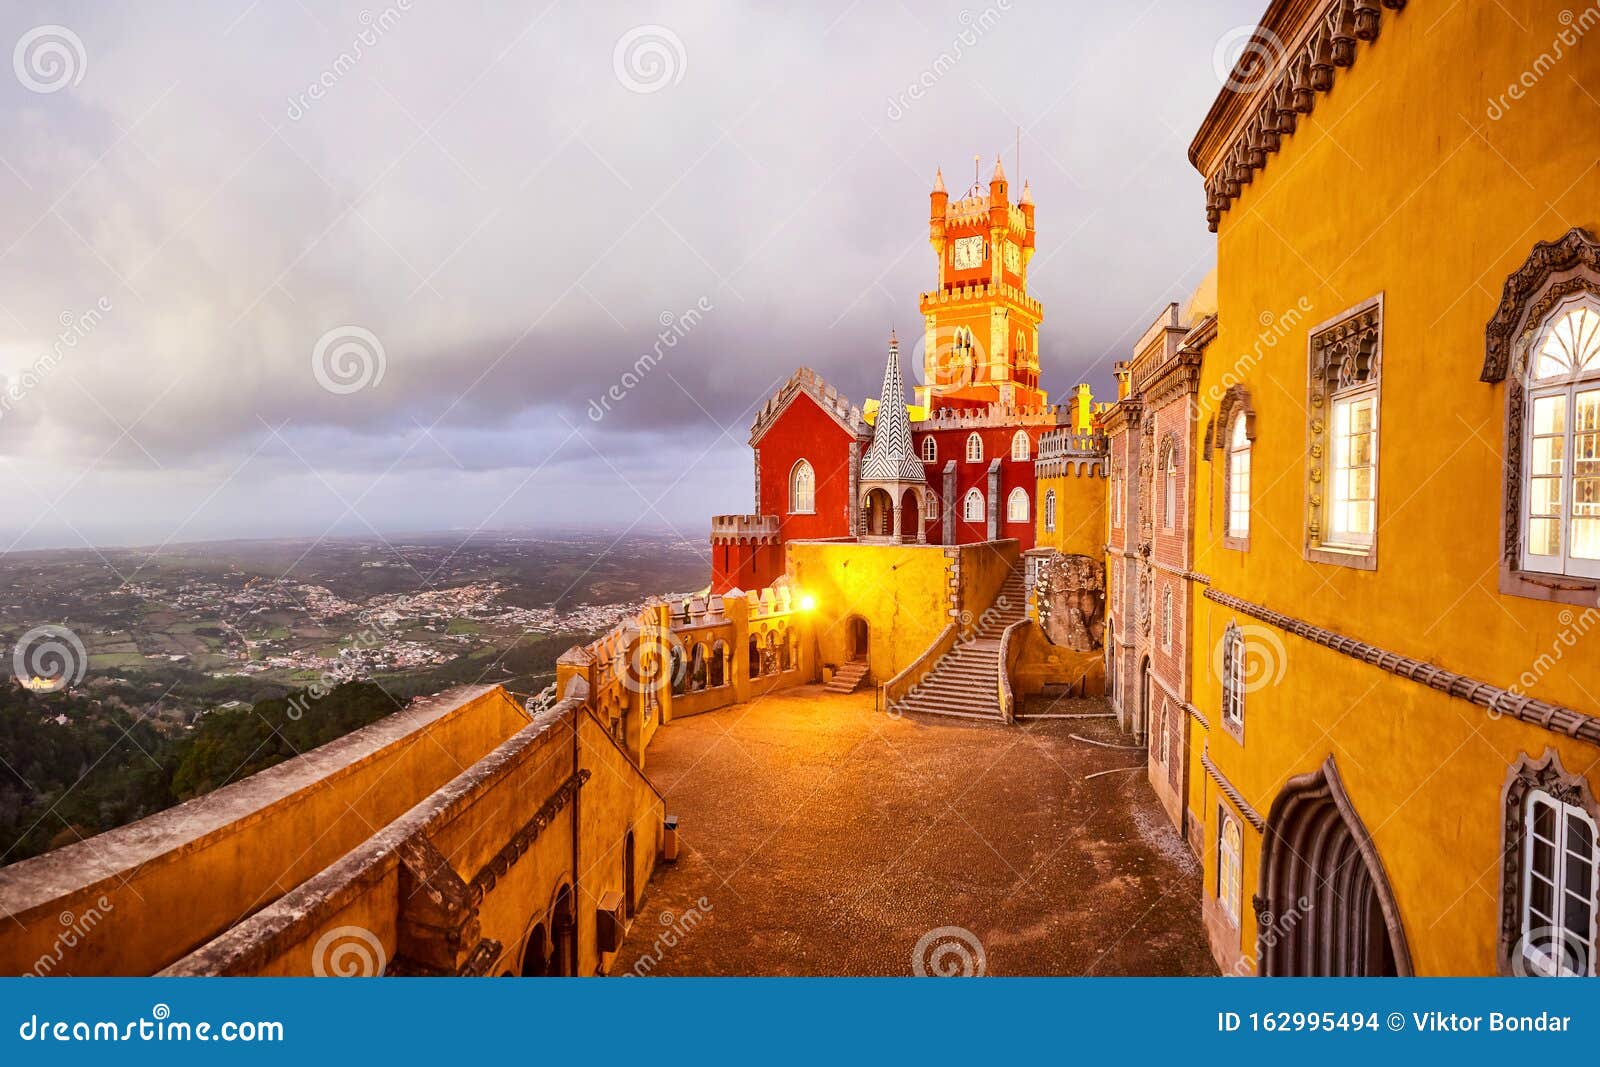 pena palace in sintra, lisbon, portugal in the night lights. famous landmark. most beautiful castles in europe